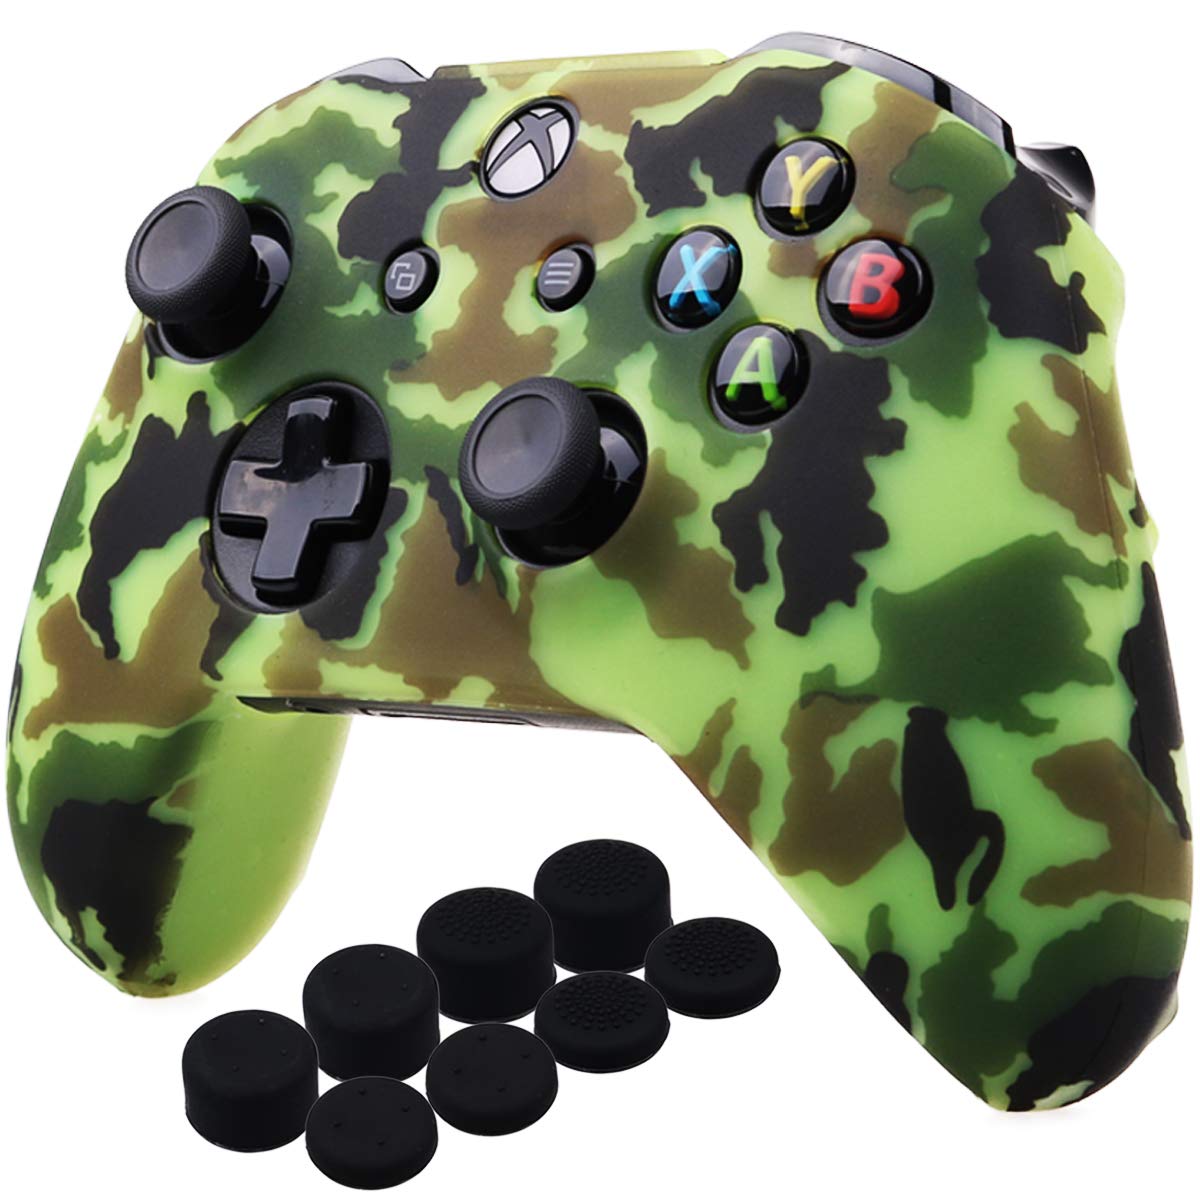 Xbox Controller Silicone Skin with Finger Grips Bundle BN36